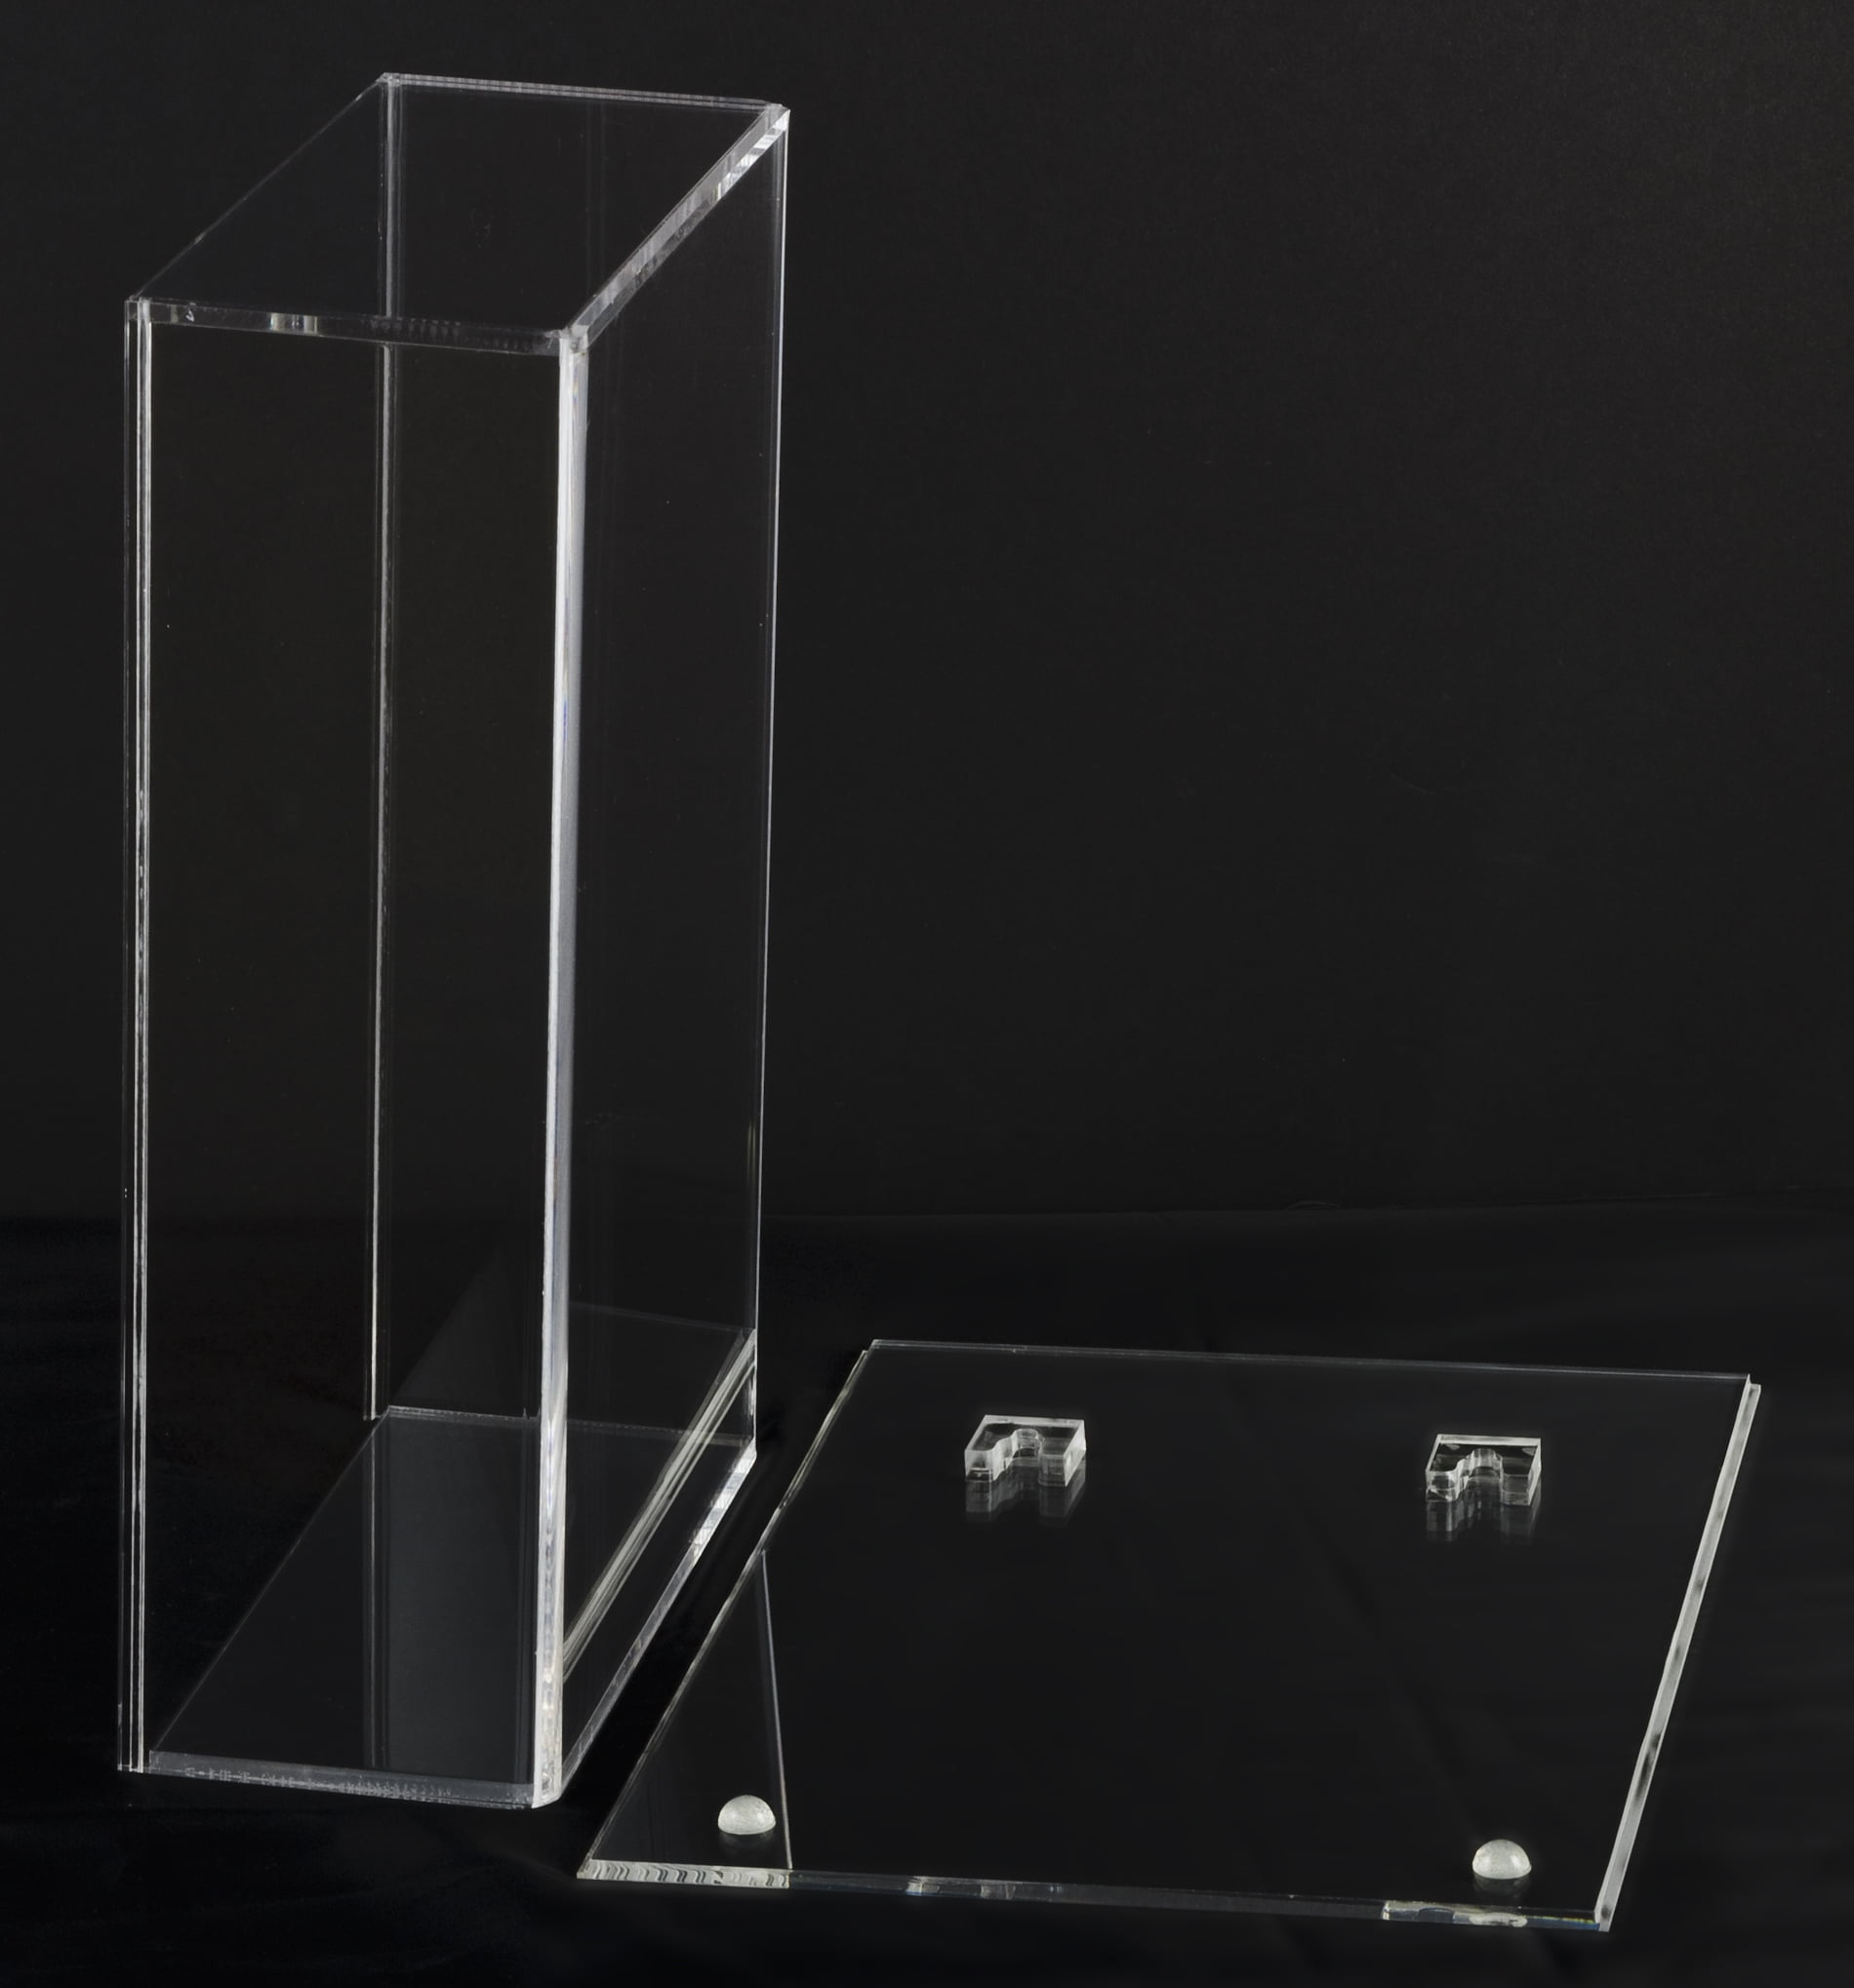 Deluxe Clear Acrylic Book Display Case with White Base (A030B-WDS